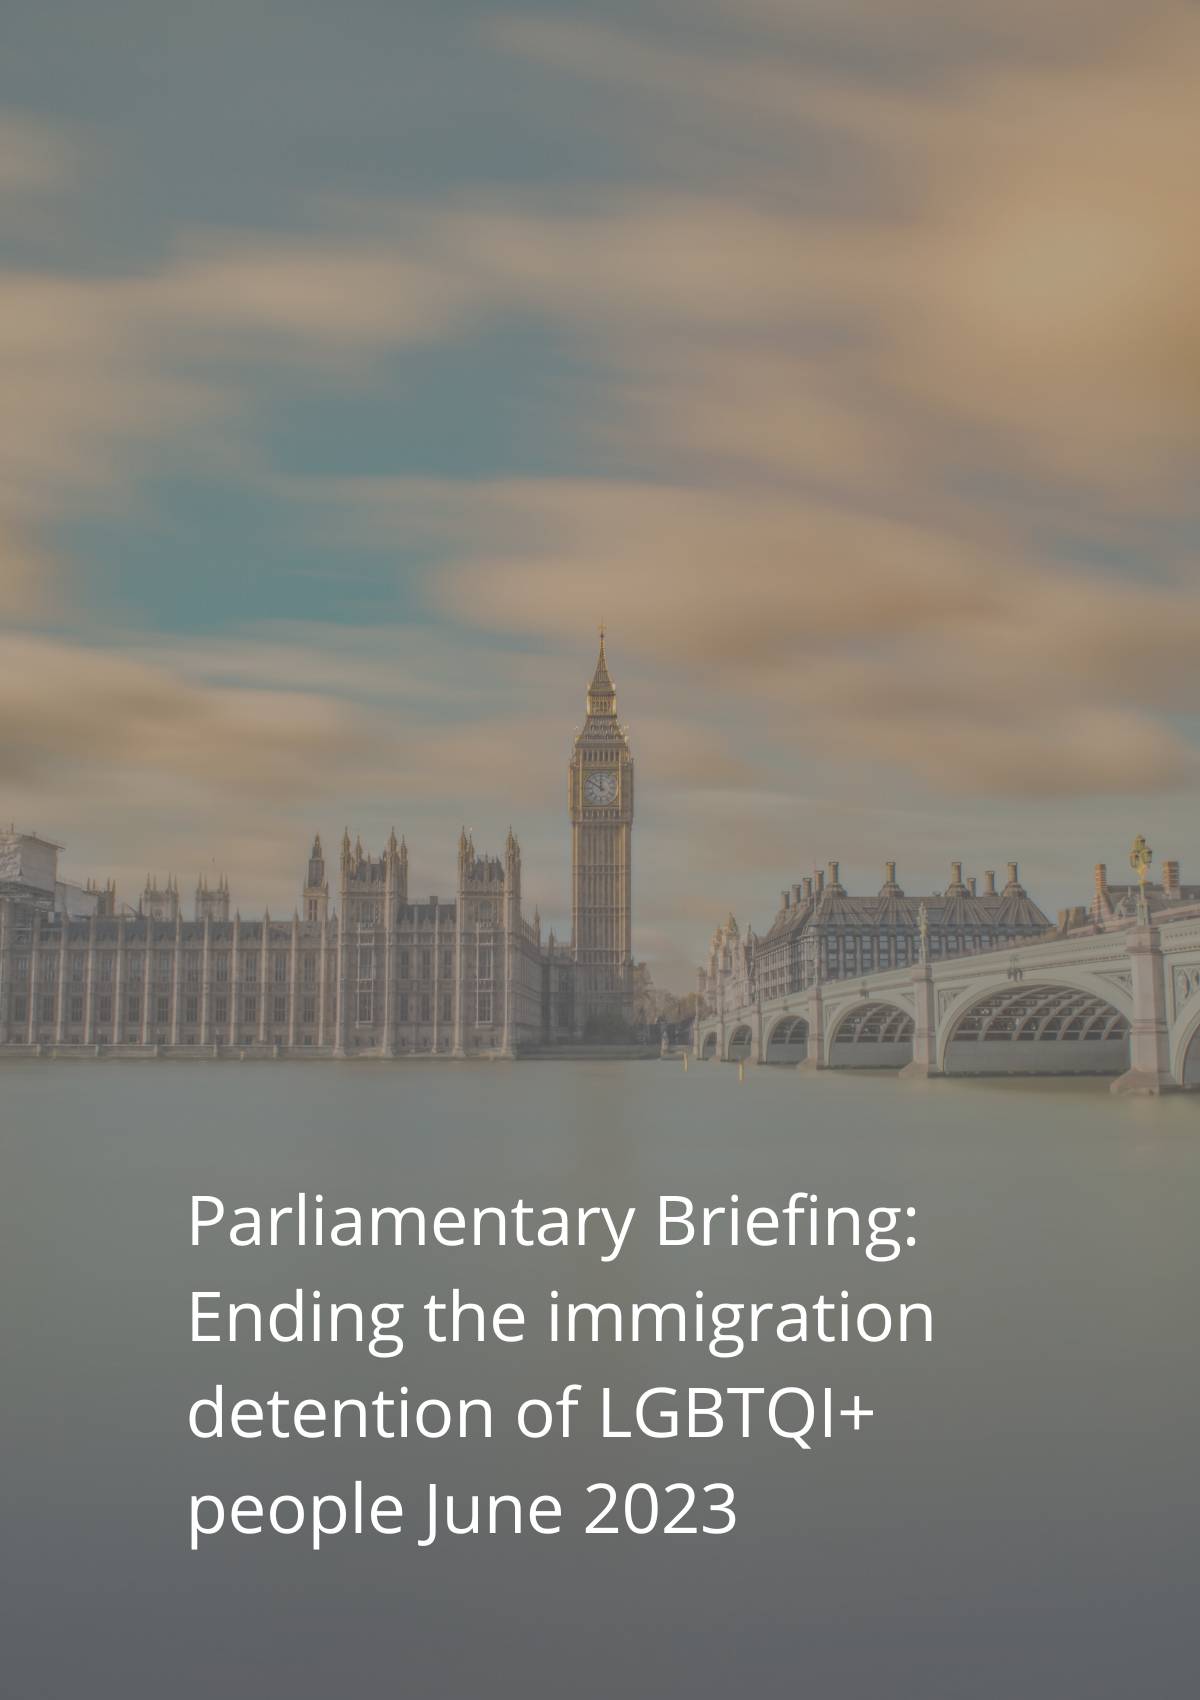 Parliament briefing ending the immigration detention of lgbtq.